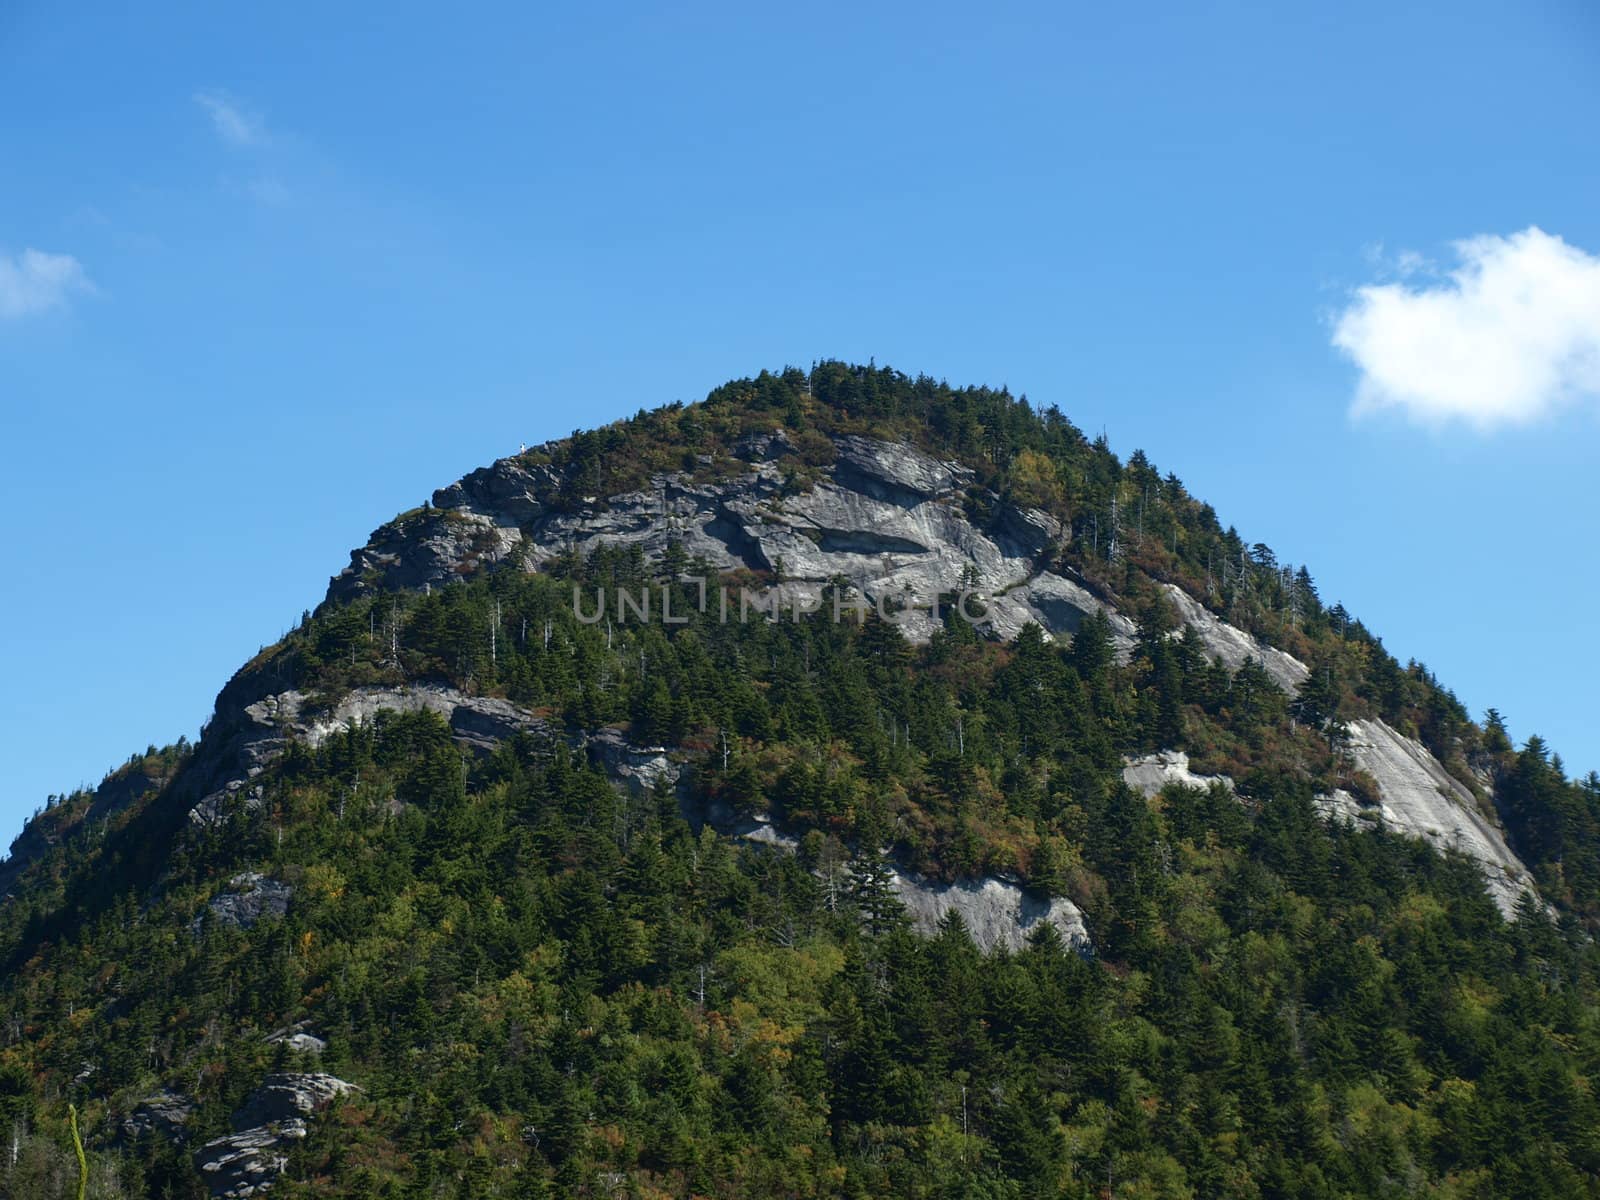 A rounded peak seen along the trail in North Carolina